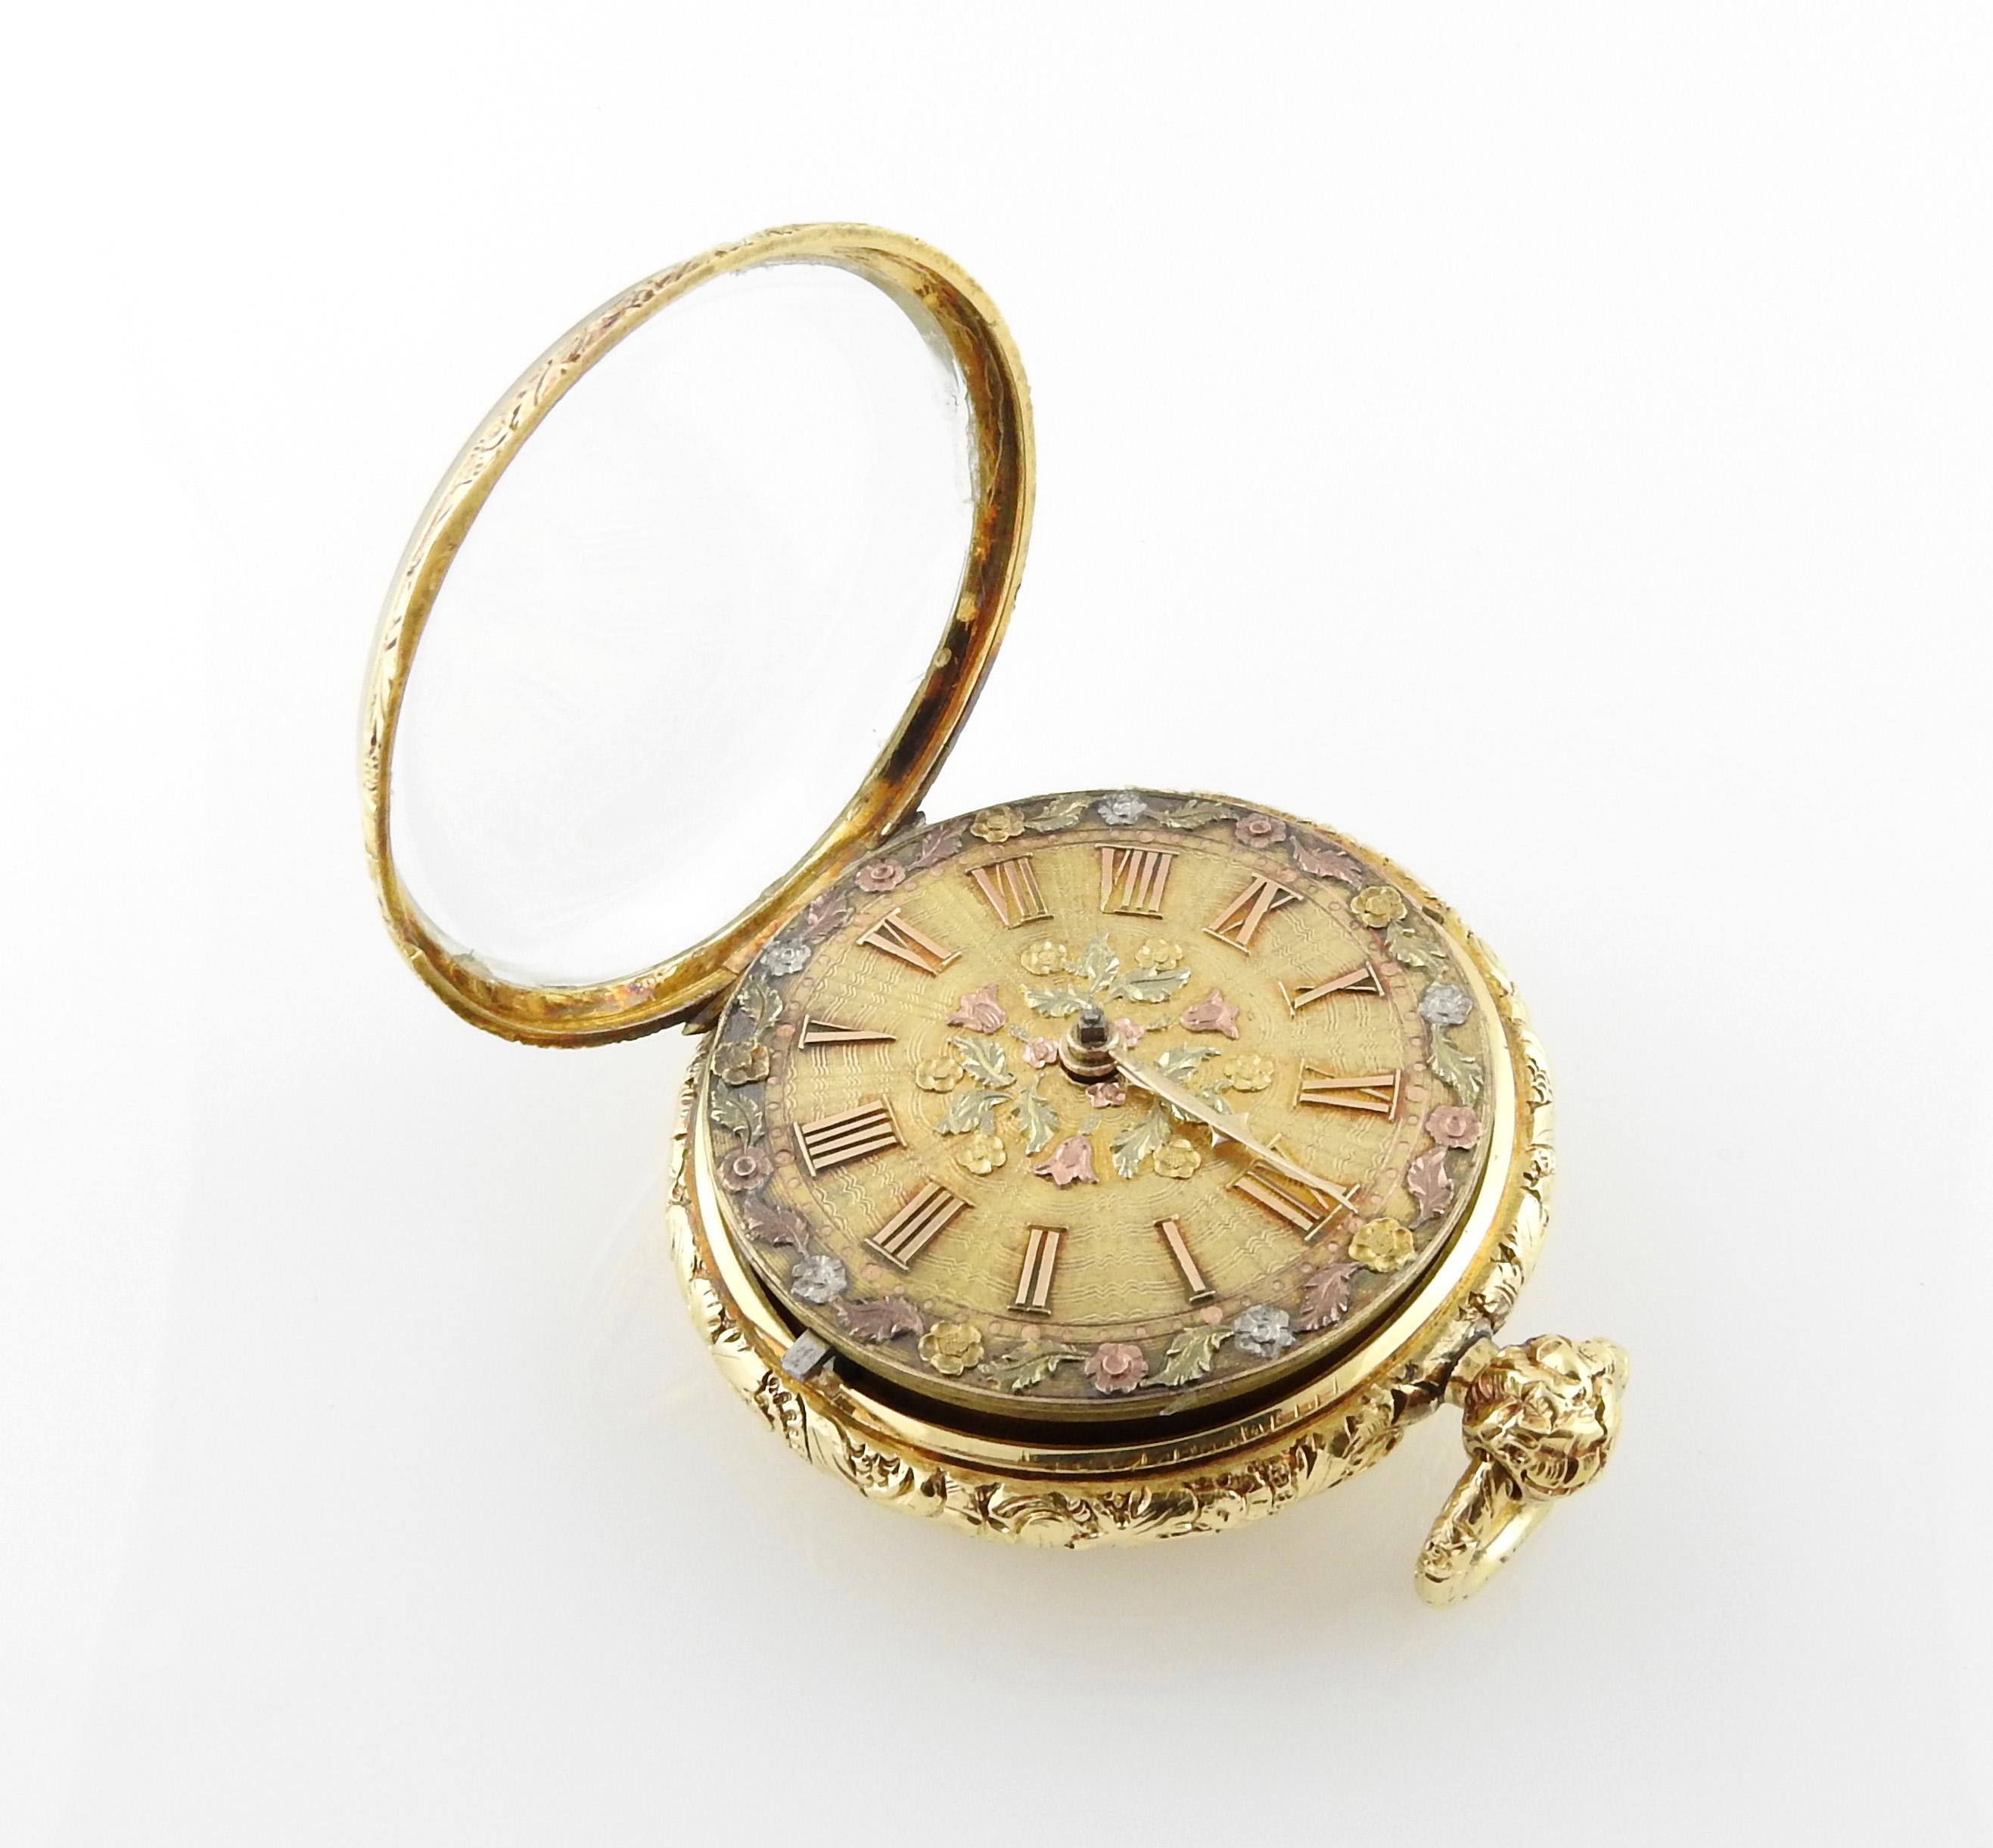 Verge Crown Wheel Key Winding 18K Yellow Gold Ornate Pocket Watch In Good Condition For Sale In Washington Depot, CT